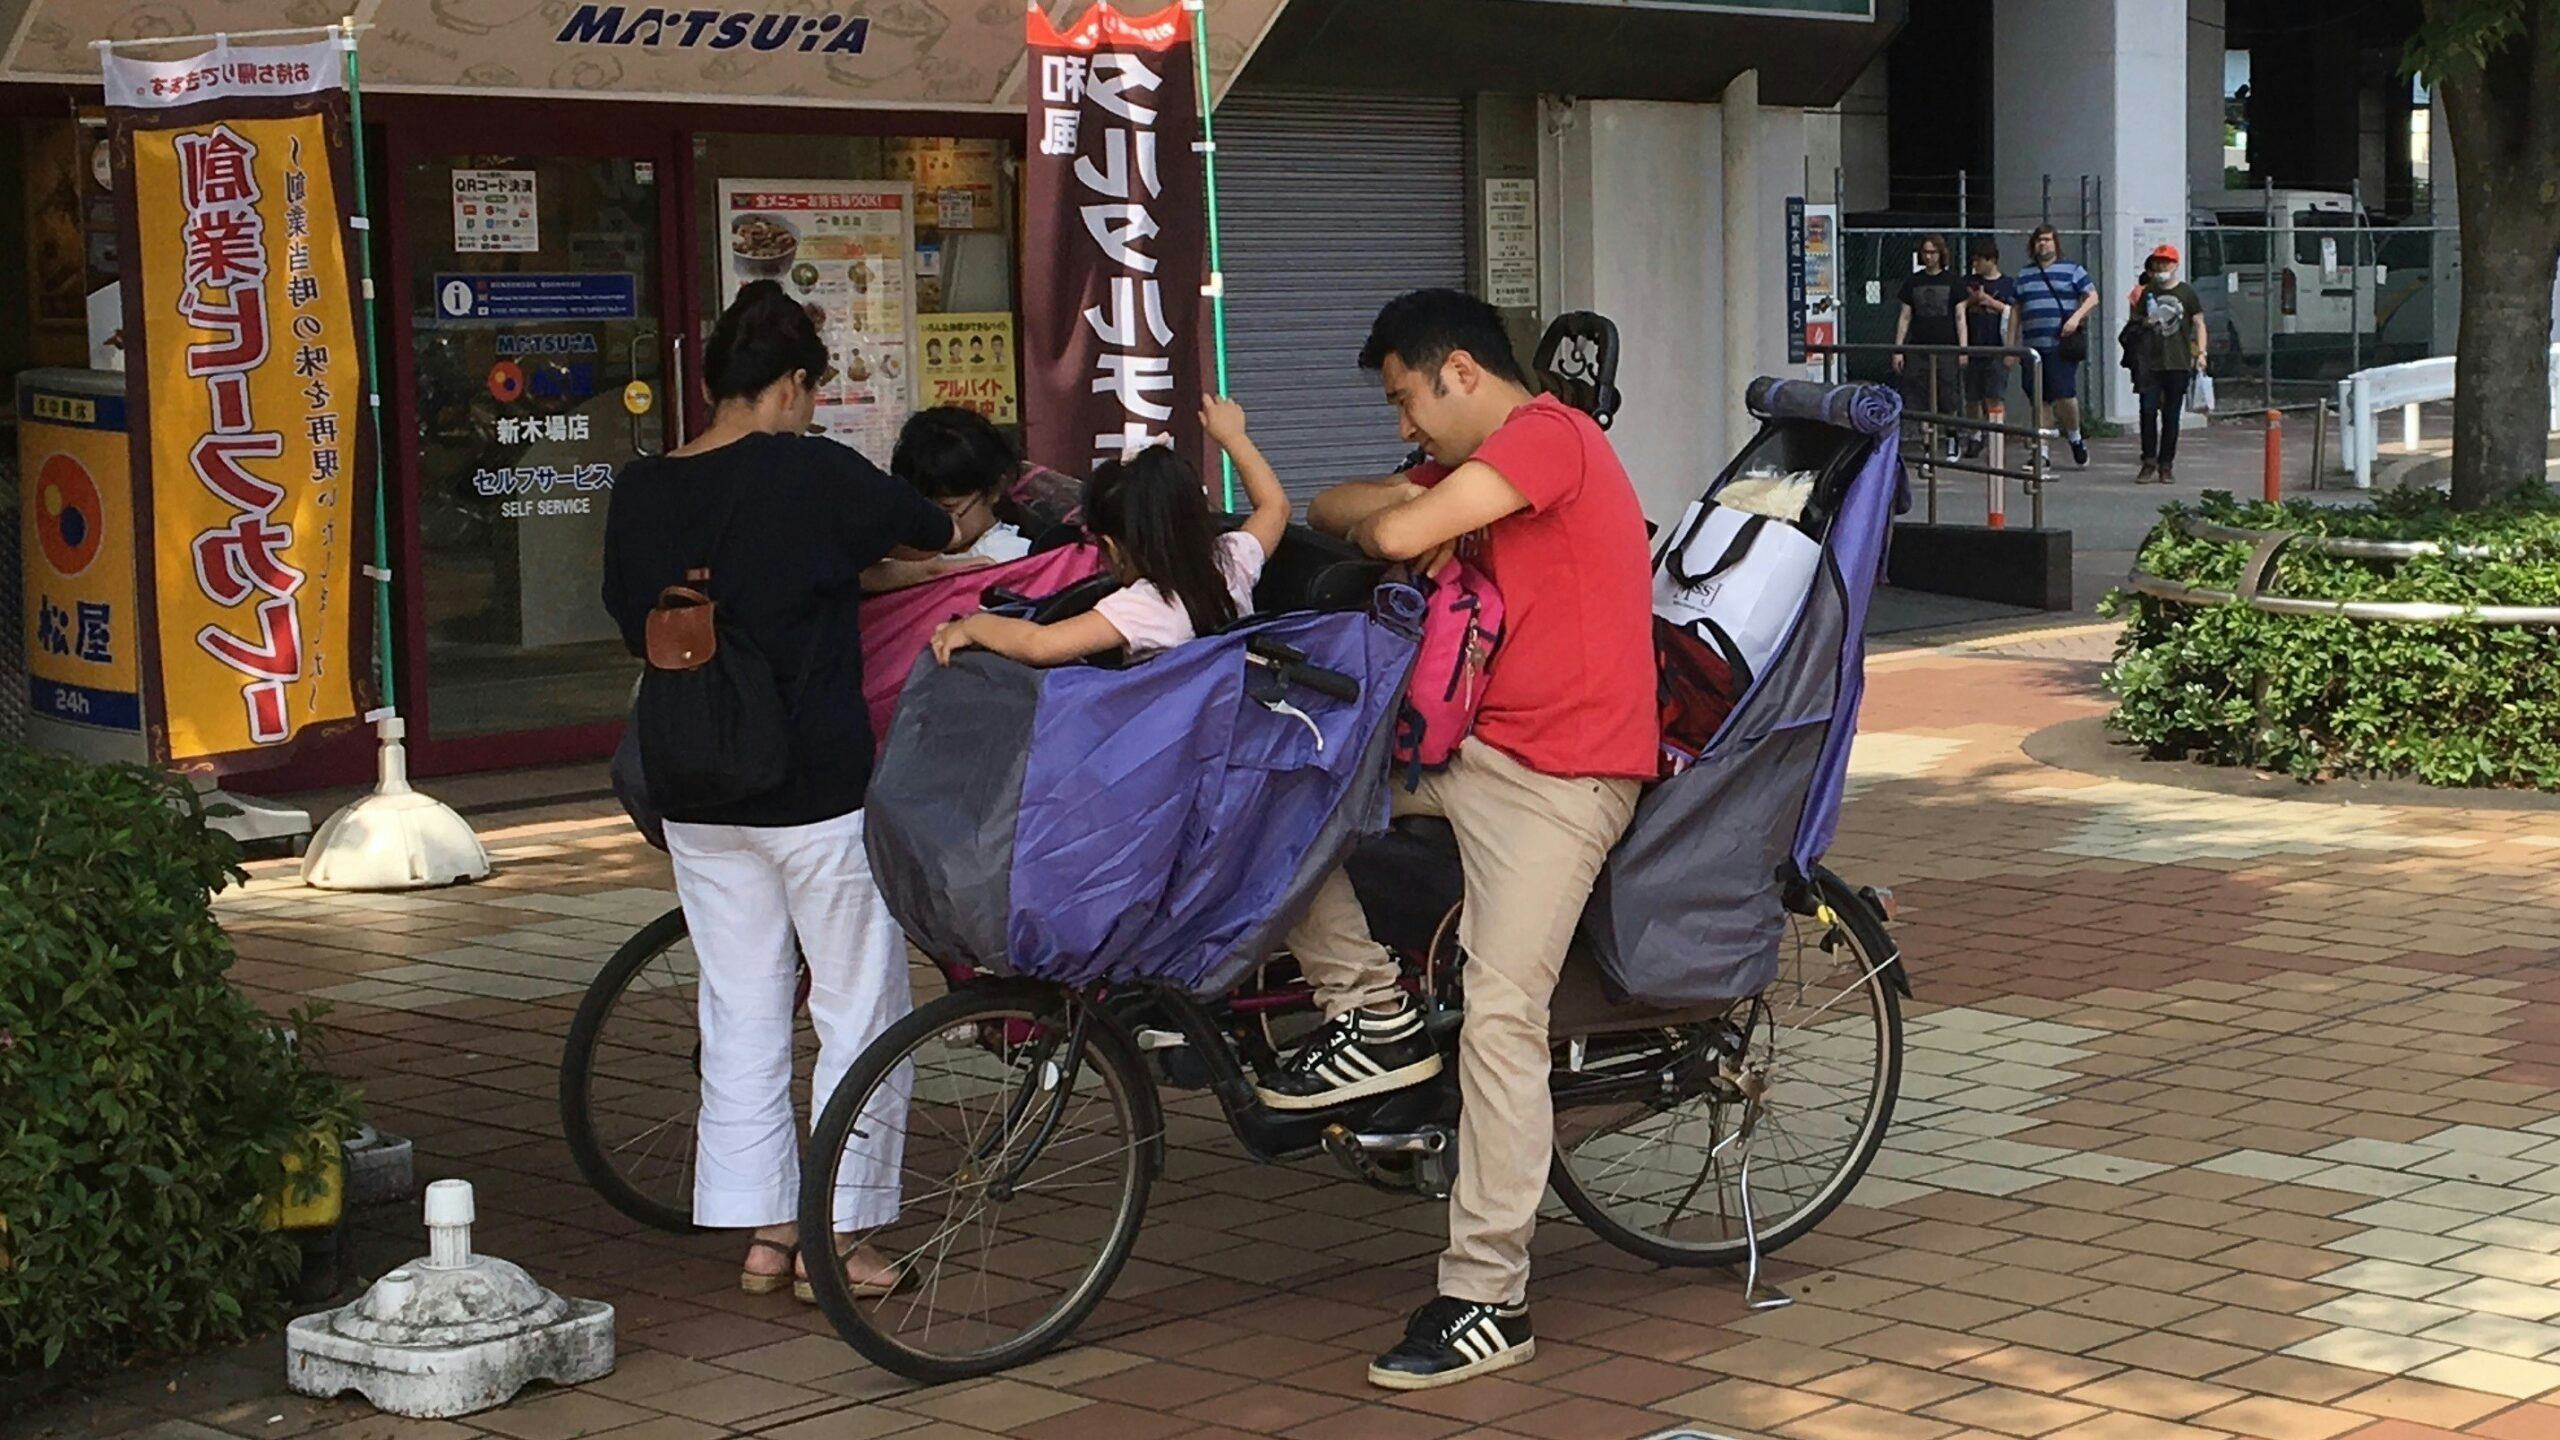 The ‘Made in Japan’ Mamacheri e-bike brand with rain-protected front child seat/shopping basket and rear child seat is popular among urban families. - Photo Jo Beckendorff